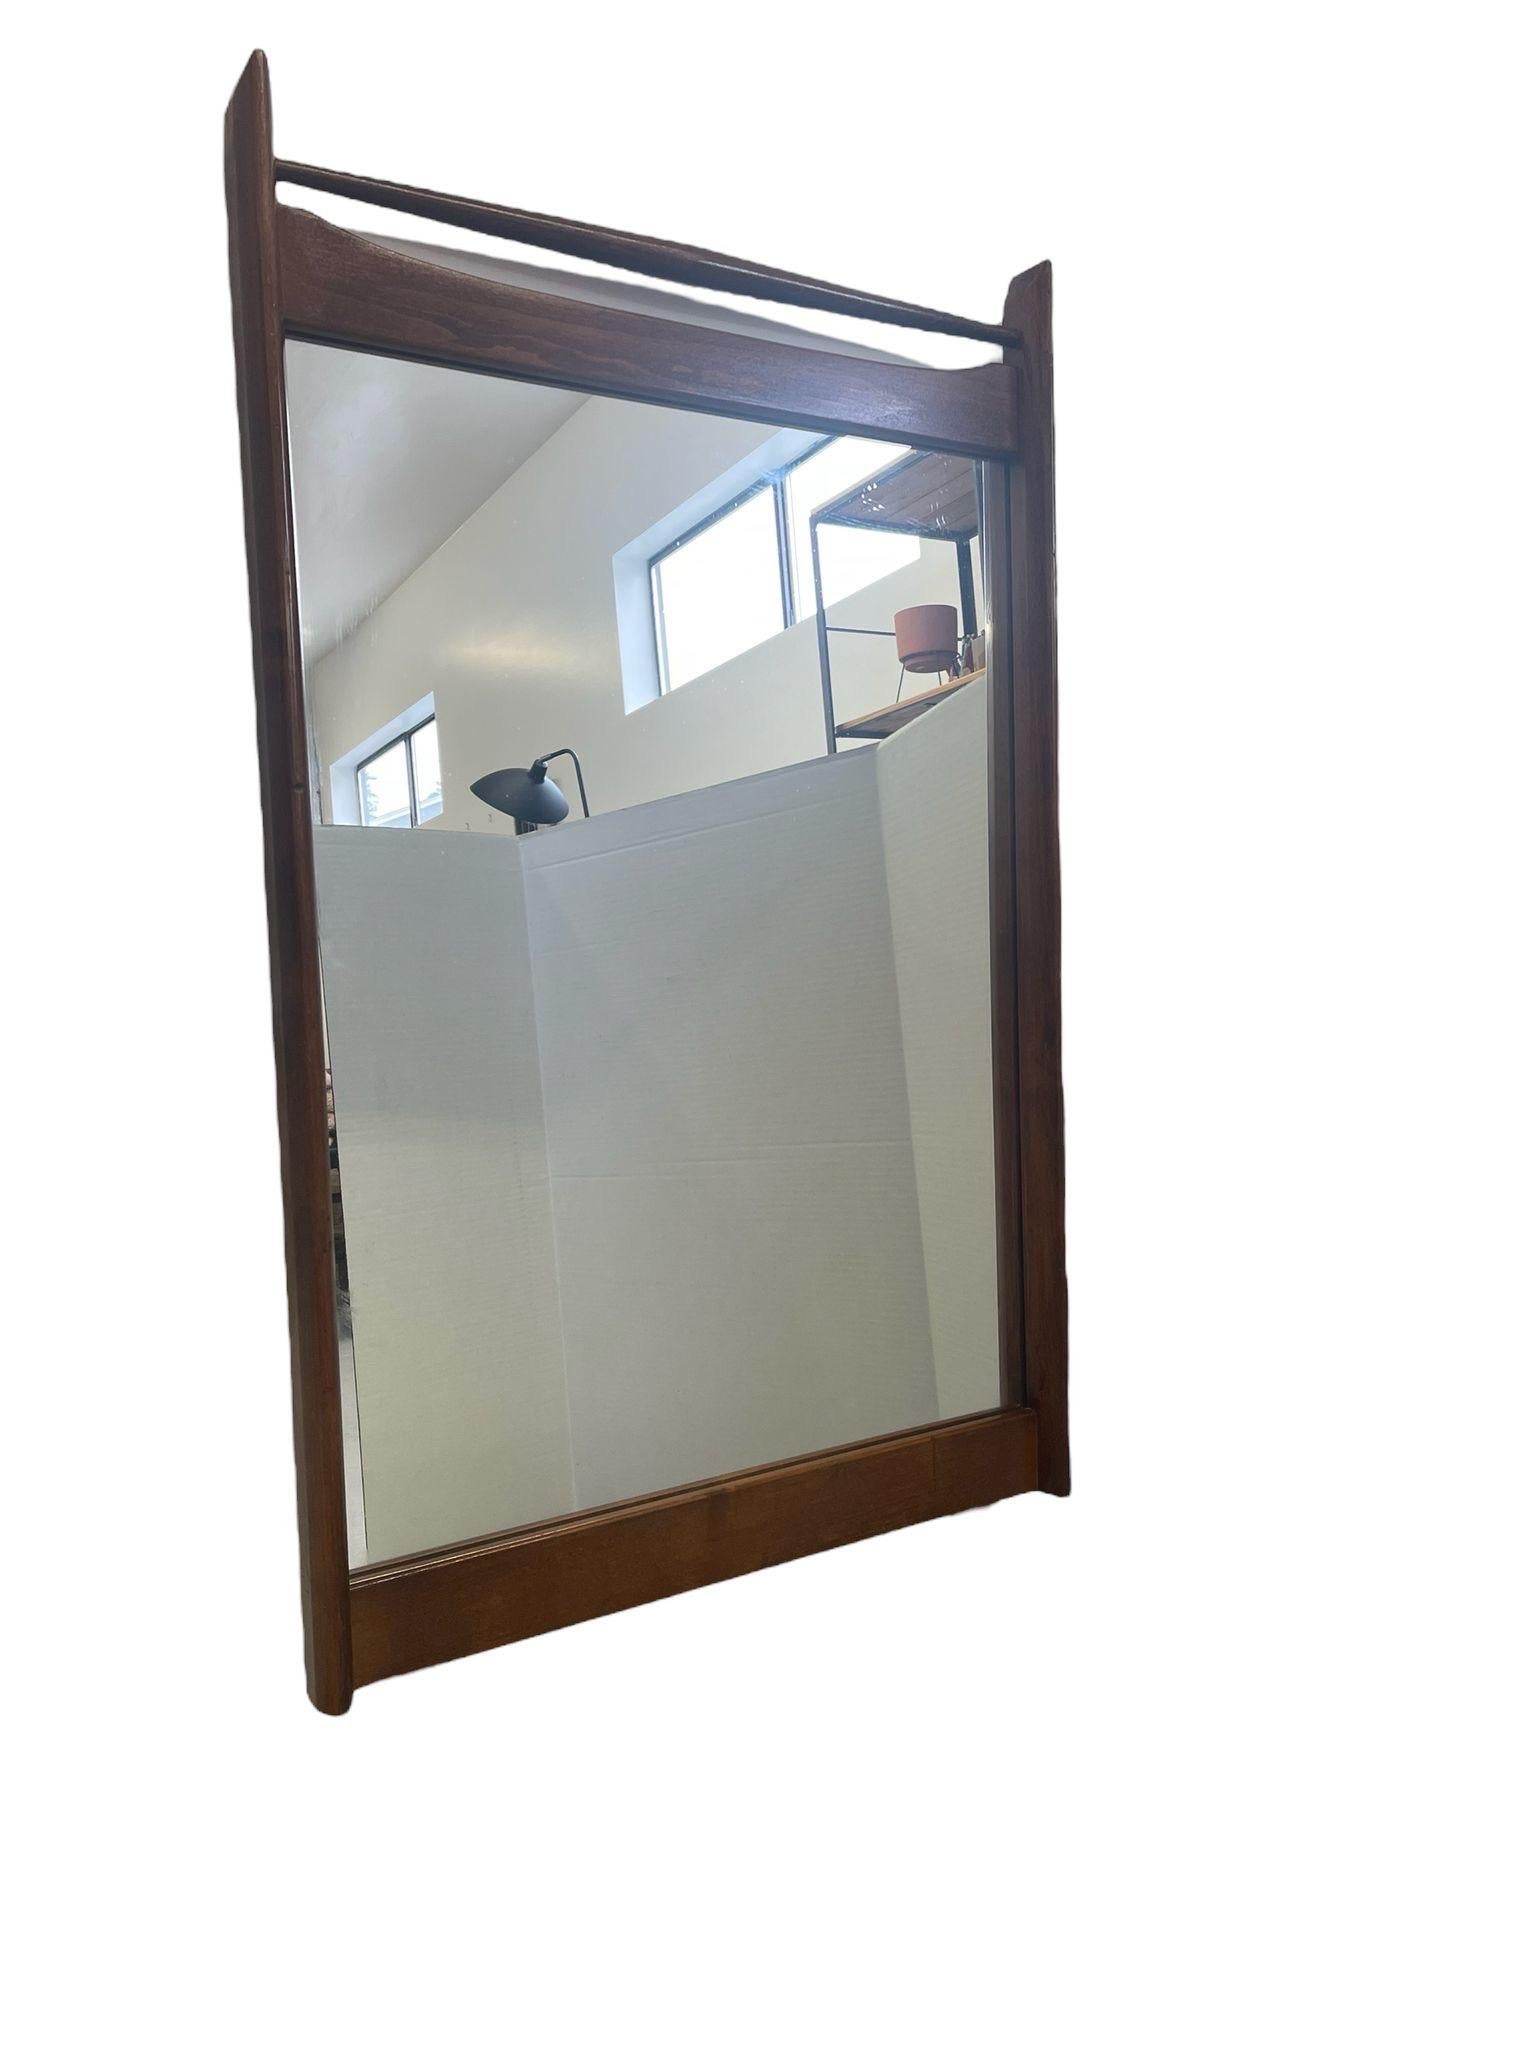 Wood Framed Tall Mirror with Sculpted Frame at the Top. No Makers Mark. Vintage Condition Consistent with Age as Pictured. 

Dimensions. 25 W ; 1/2 D ; 41 H